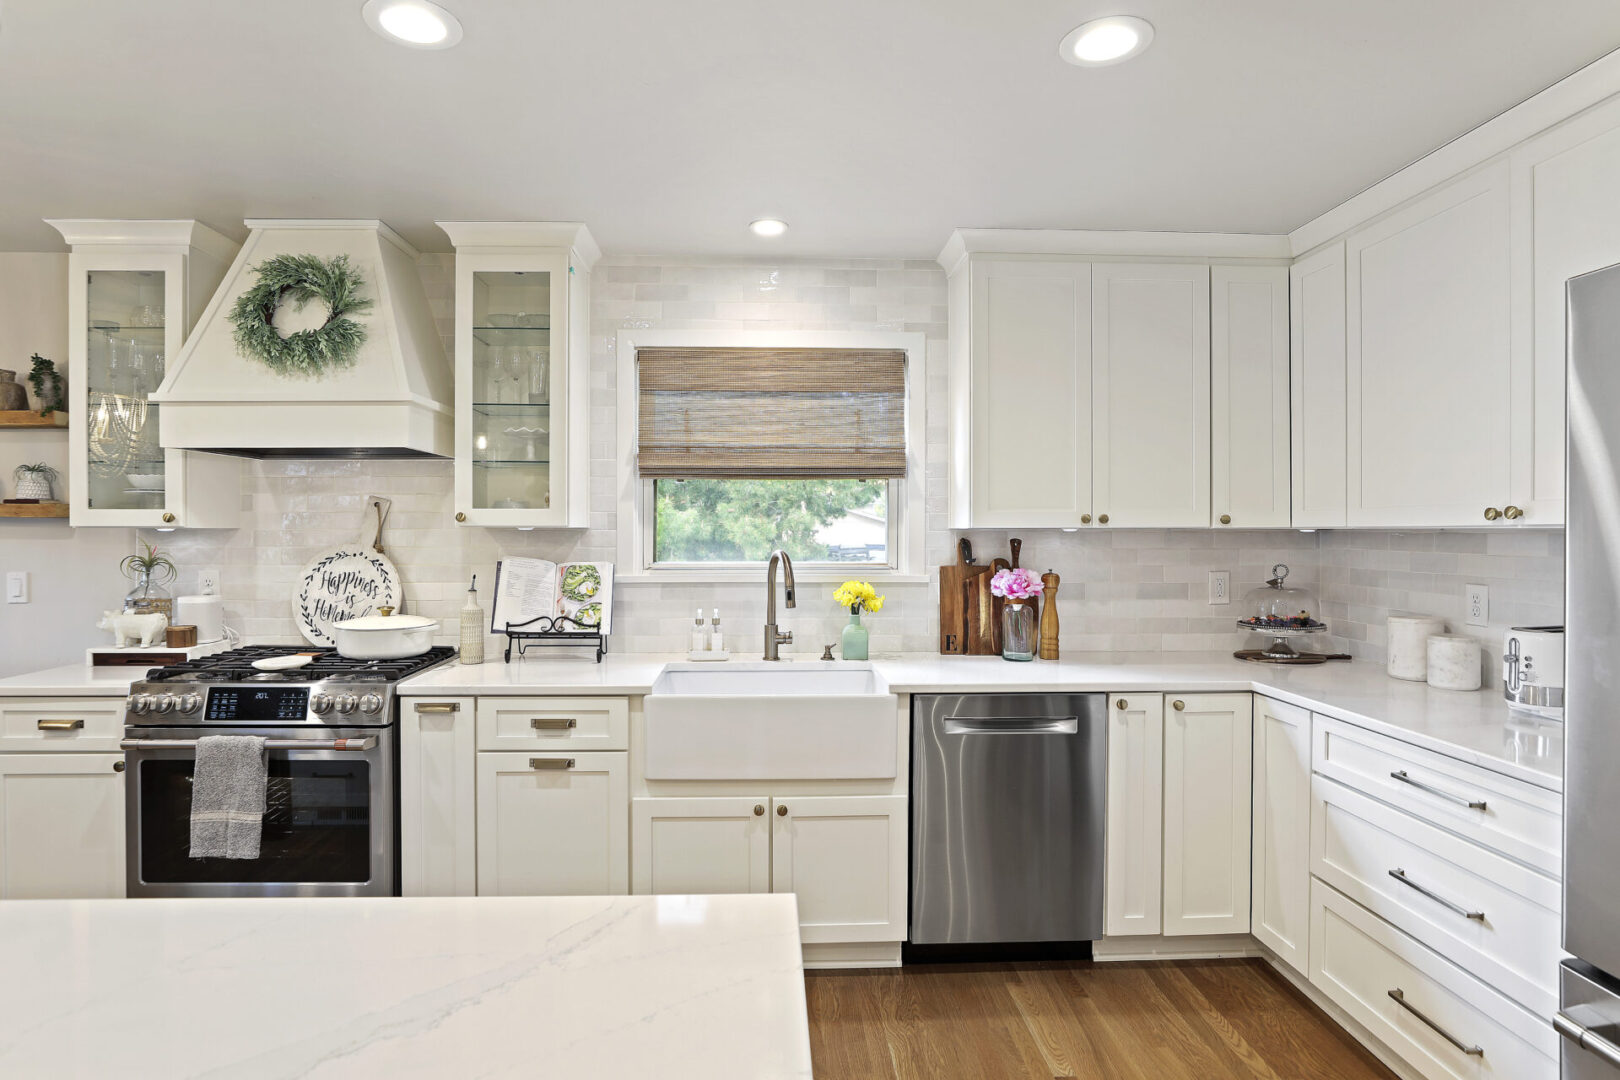 A kitchen with white cabinets and drawers